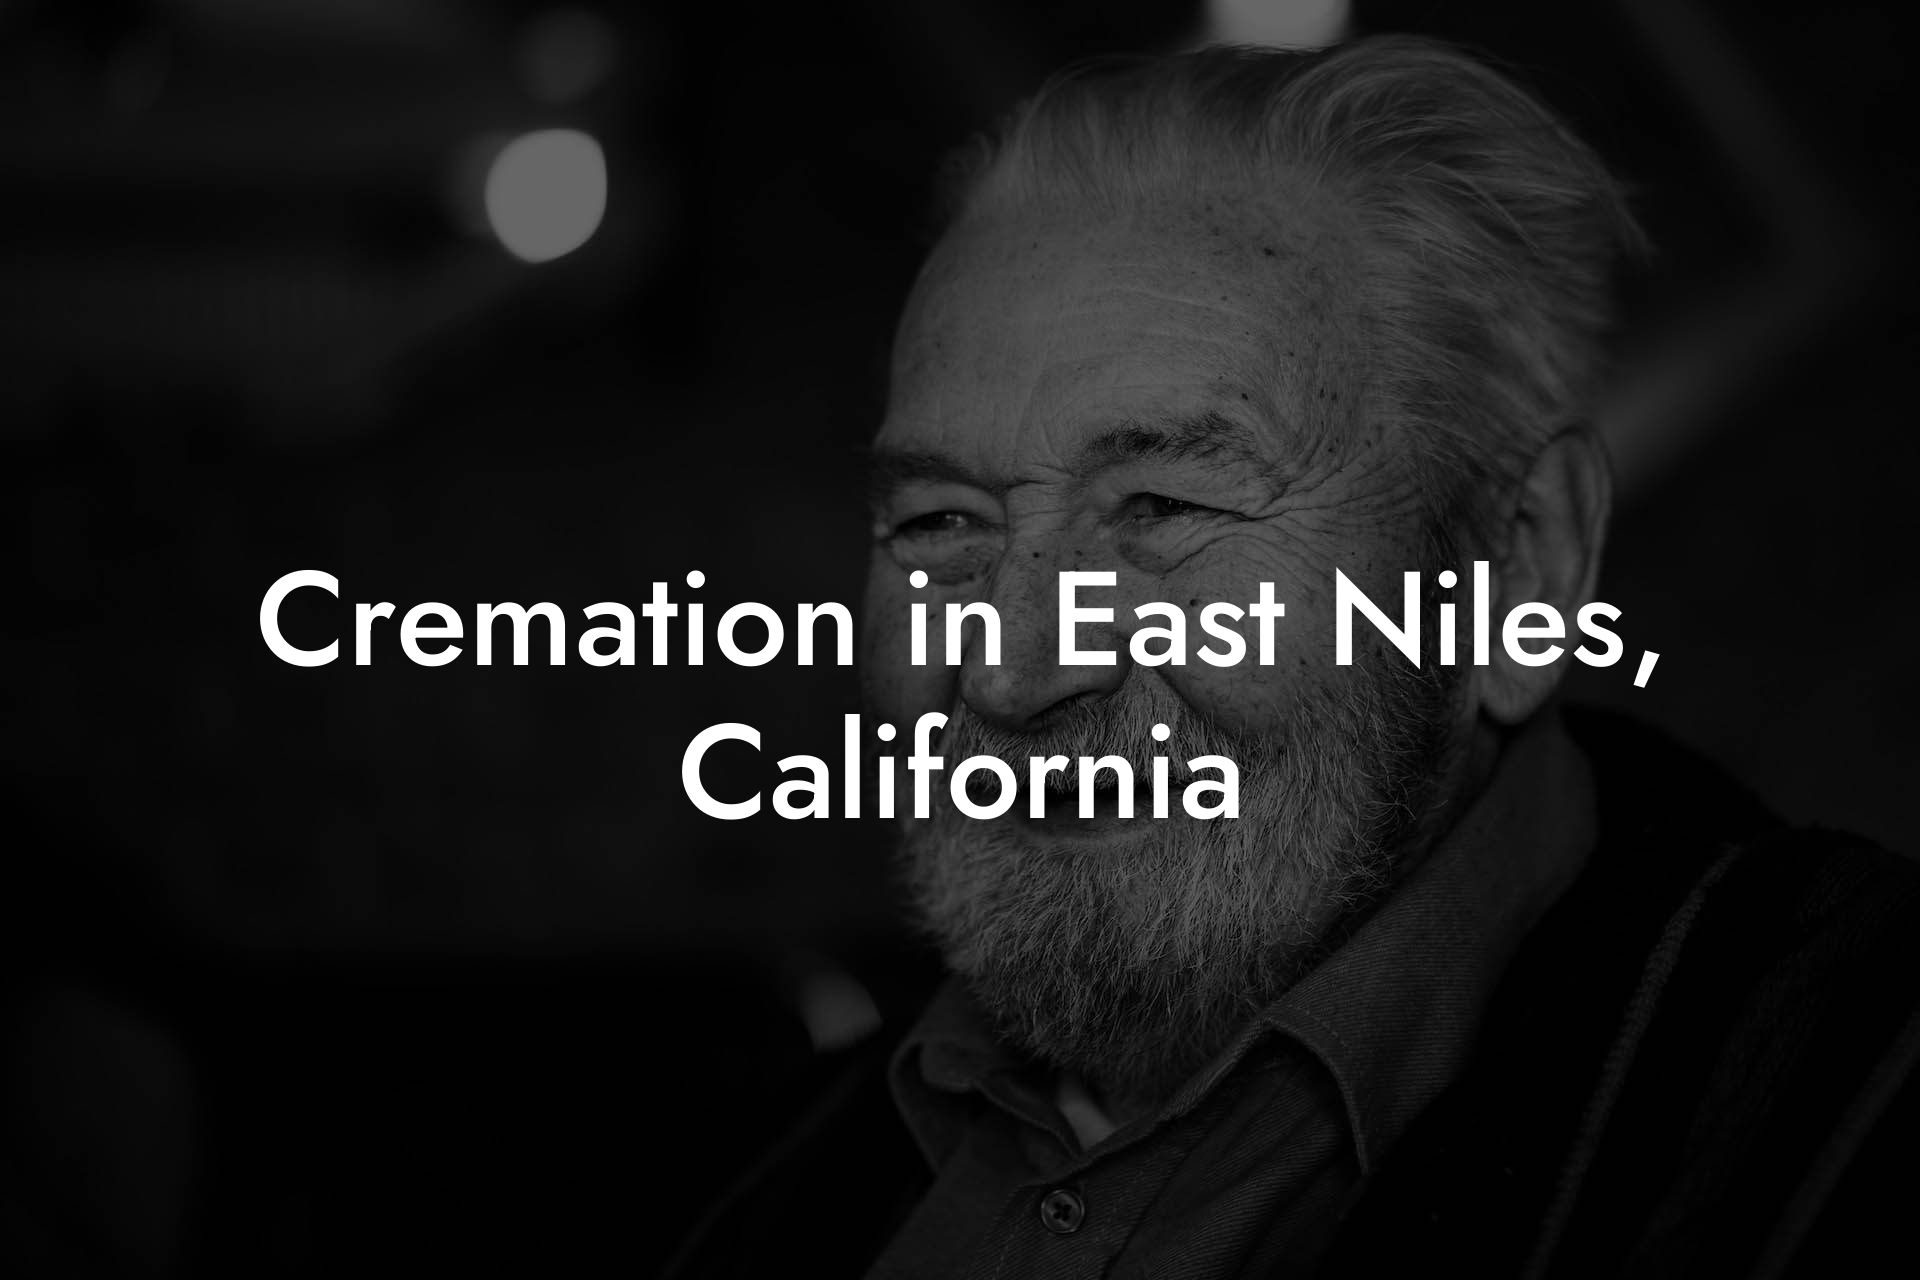 Cremation in East Niles, California